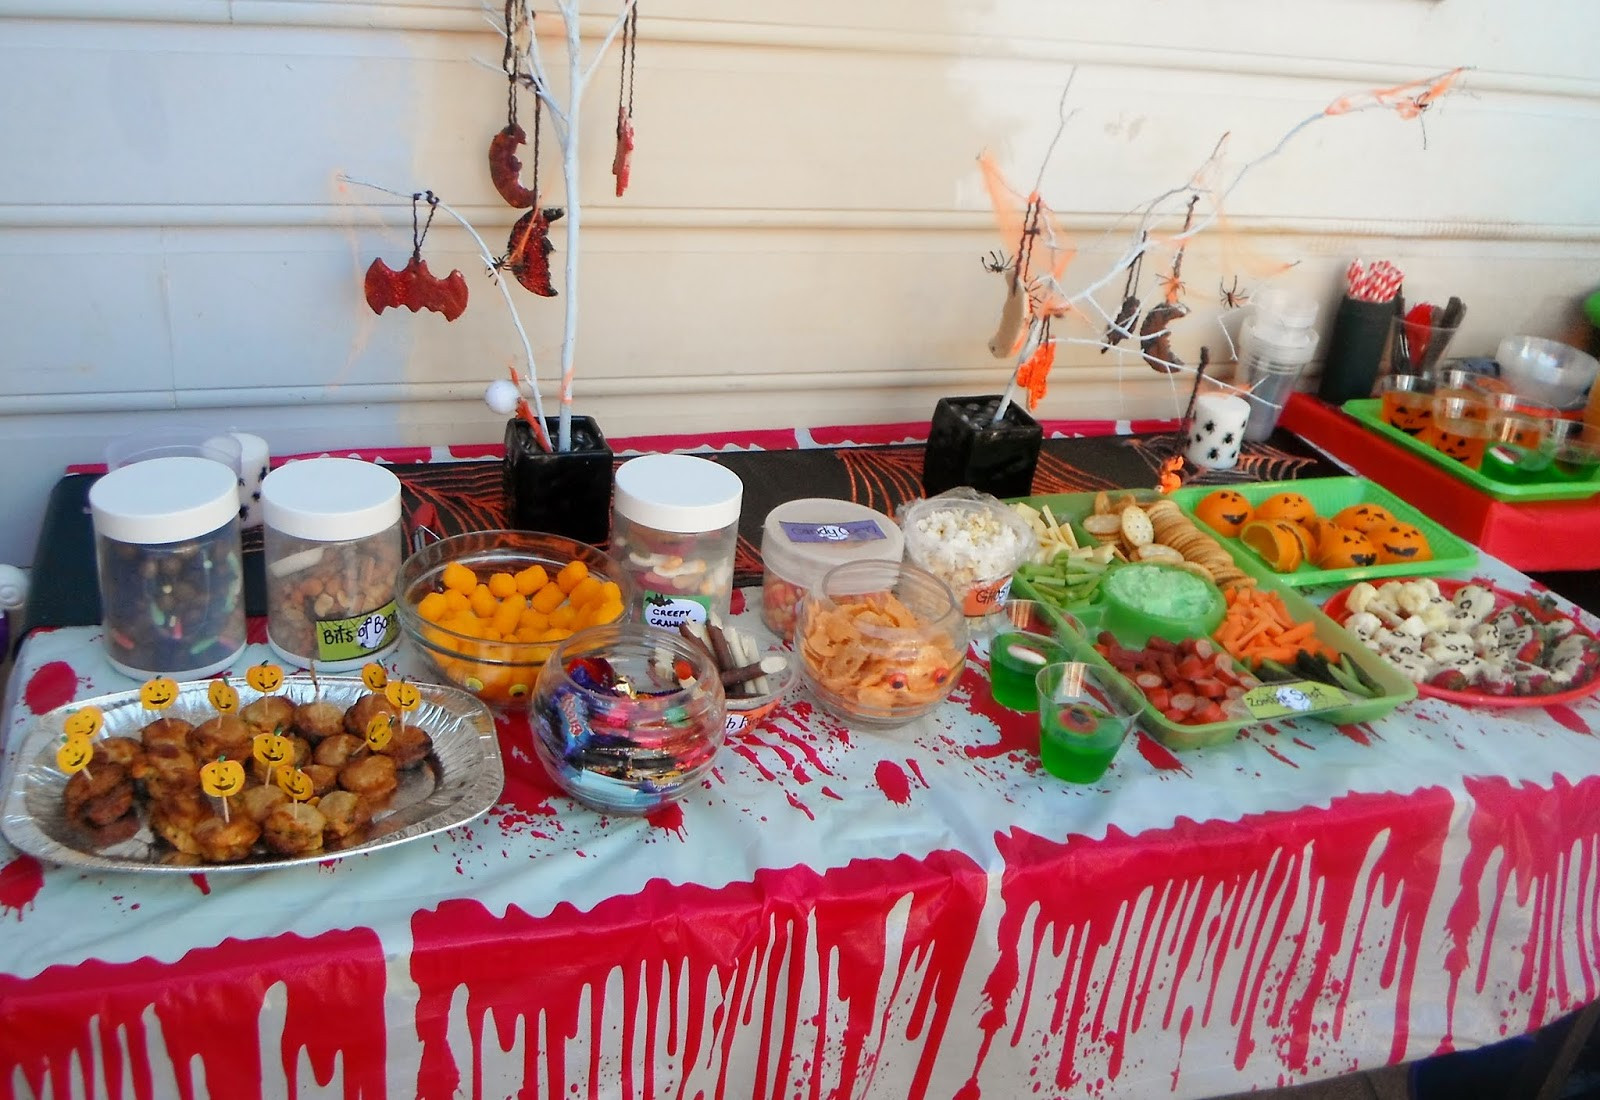 Halloween Party Recipes Ideas
 Adventures at home with Mum Halloween Party Food